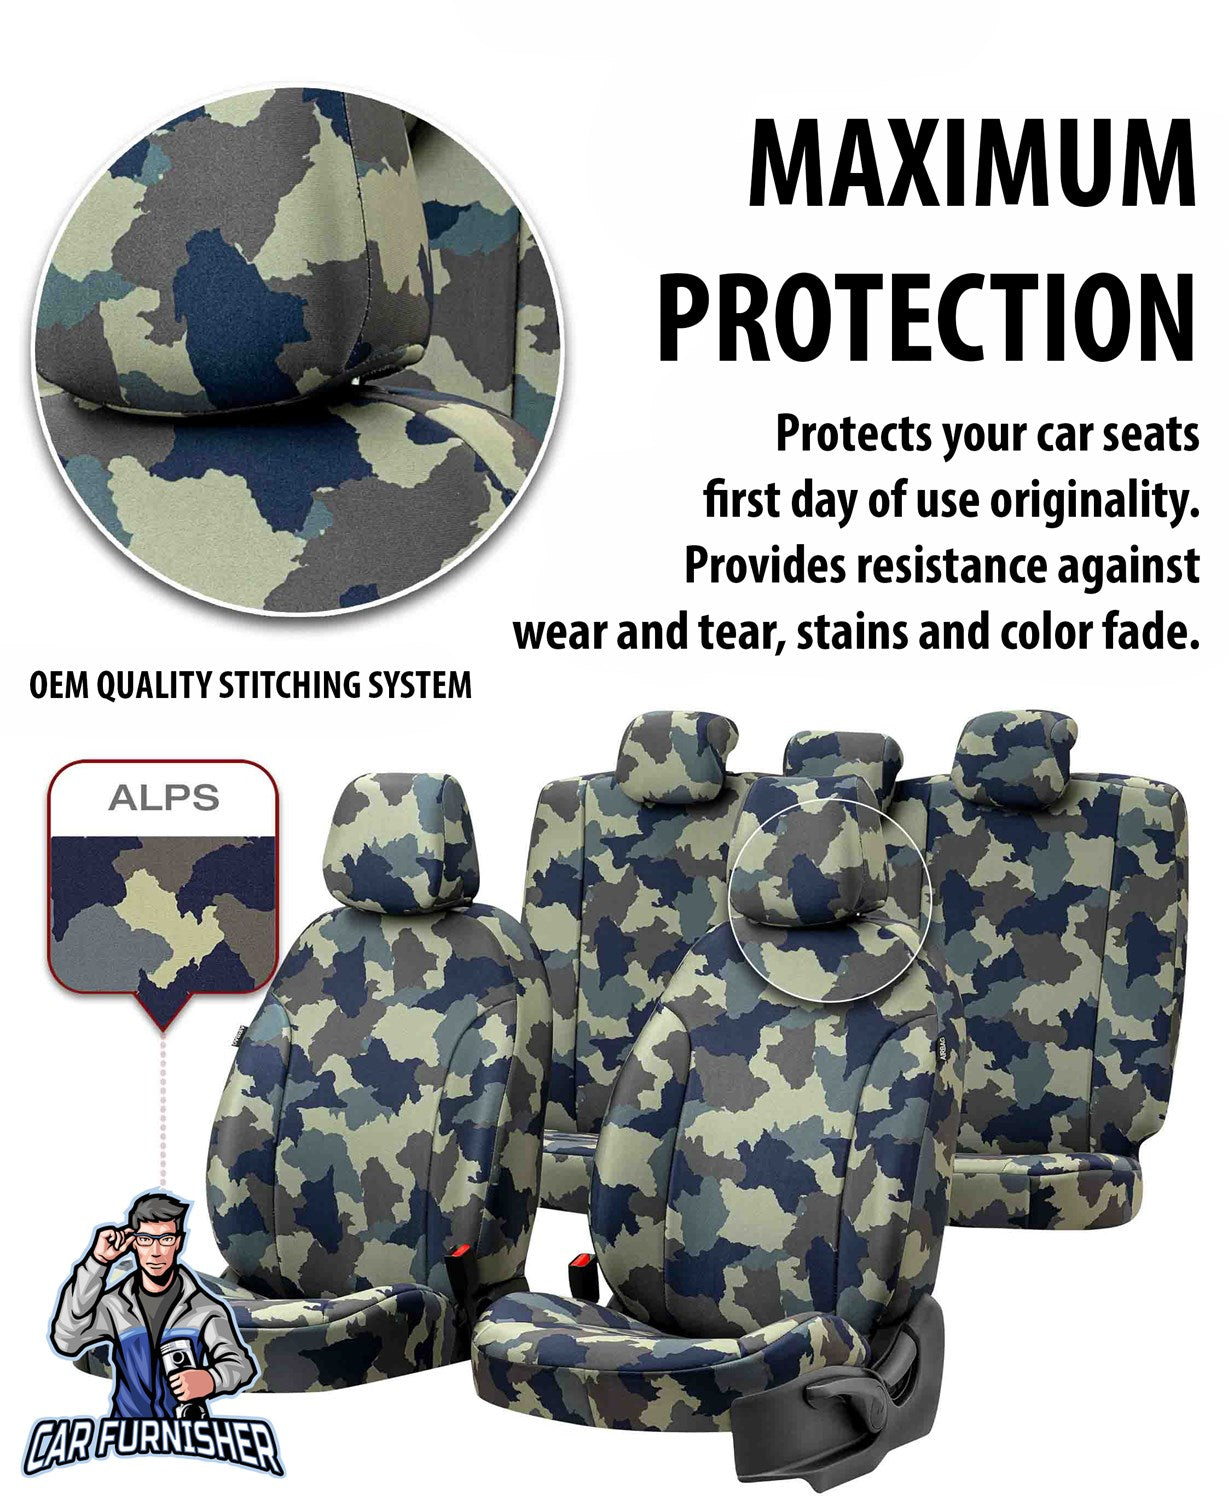 Ssangyong Tivoli Seat Covers Camouflage Waterproof Design Montblanc Camo Waterproof Fabric